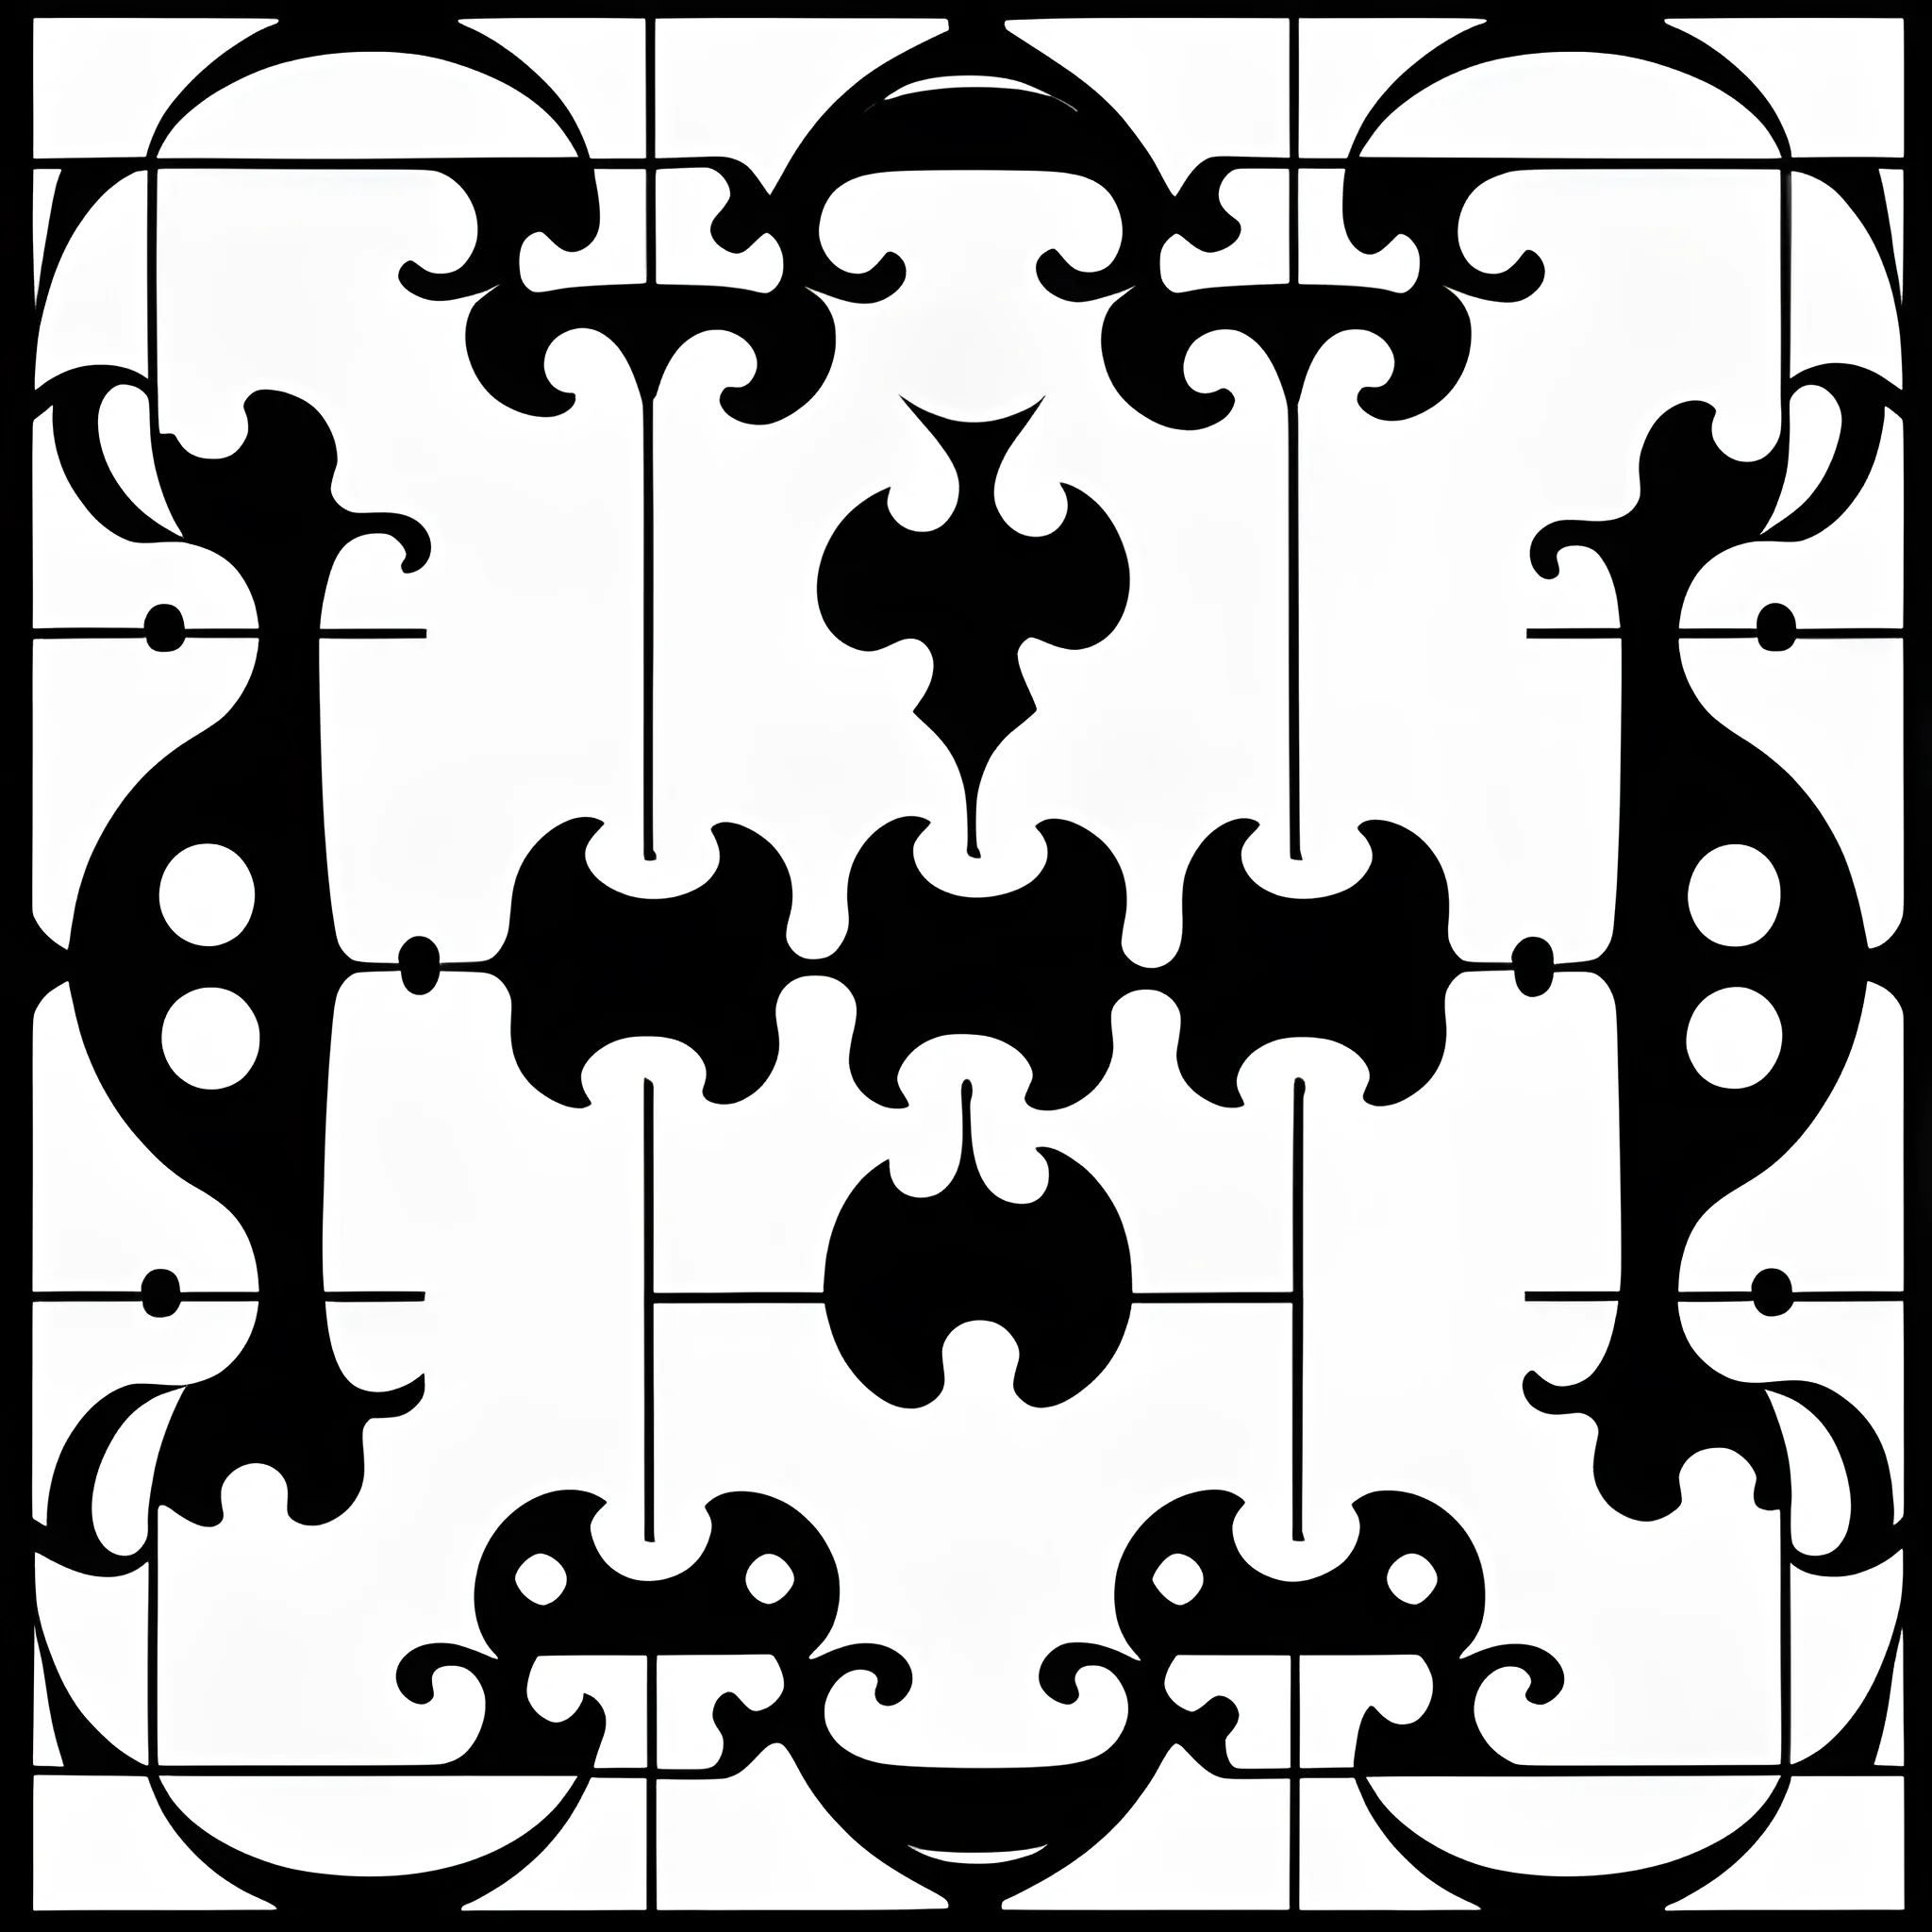 complex puzzle pattern with differente pieces, white pieces, black border, pieces with straight edges, square resolution., Cartoon.